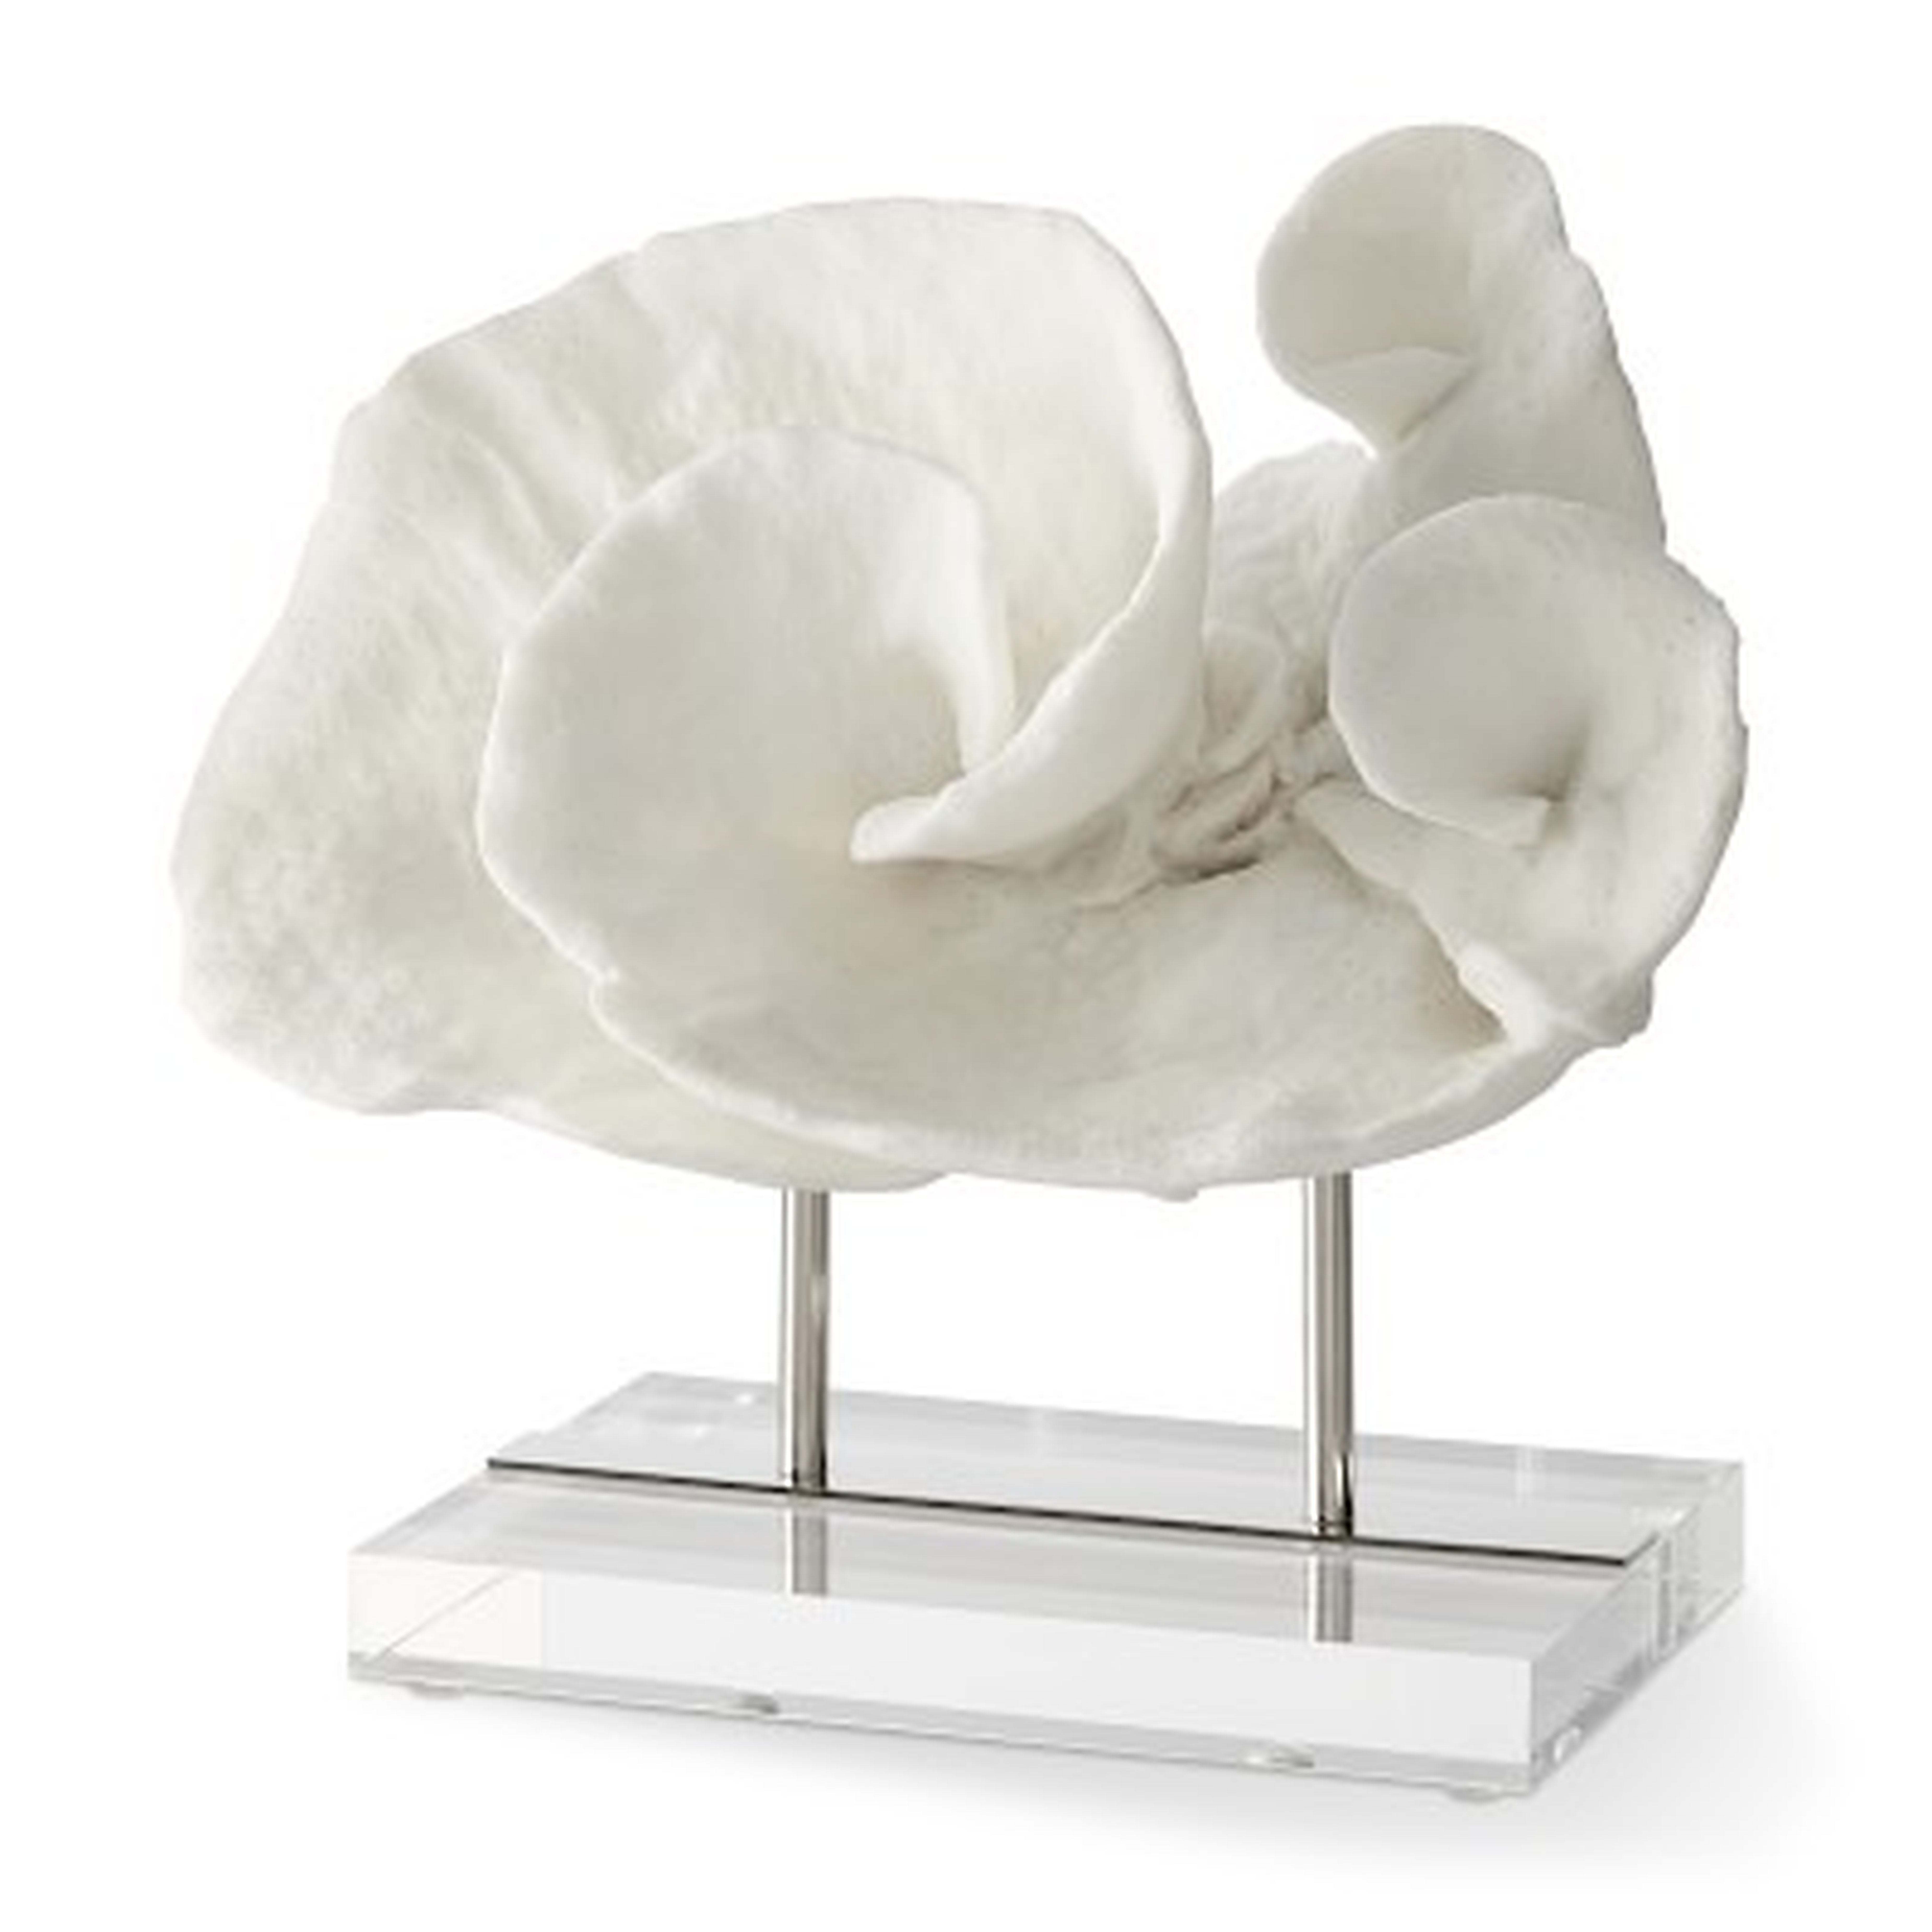 Sea Life Object On Stand, Coral - Williams Sonoma